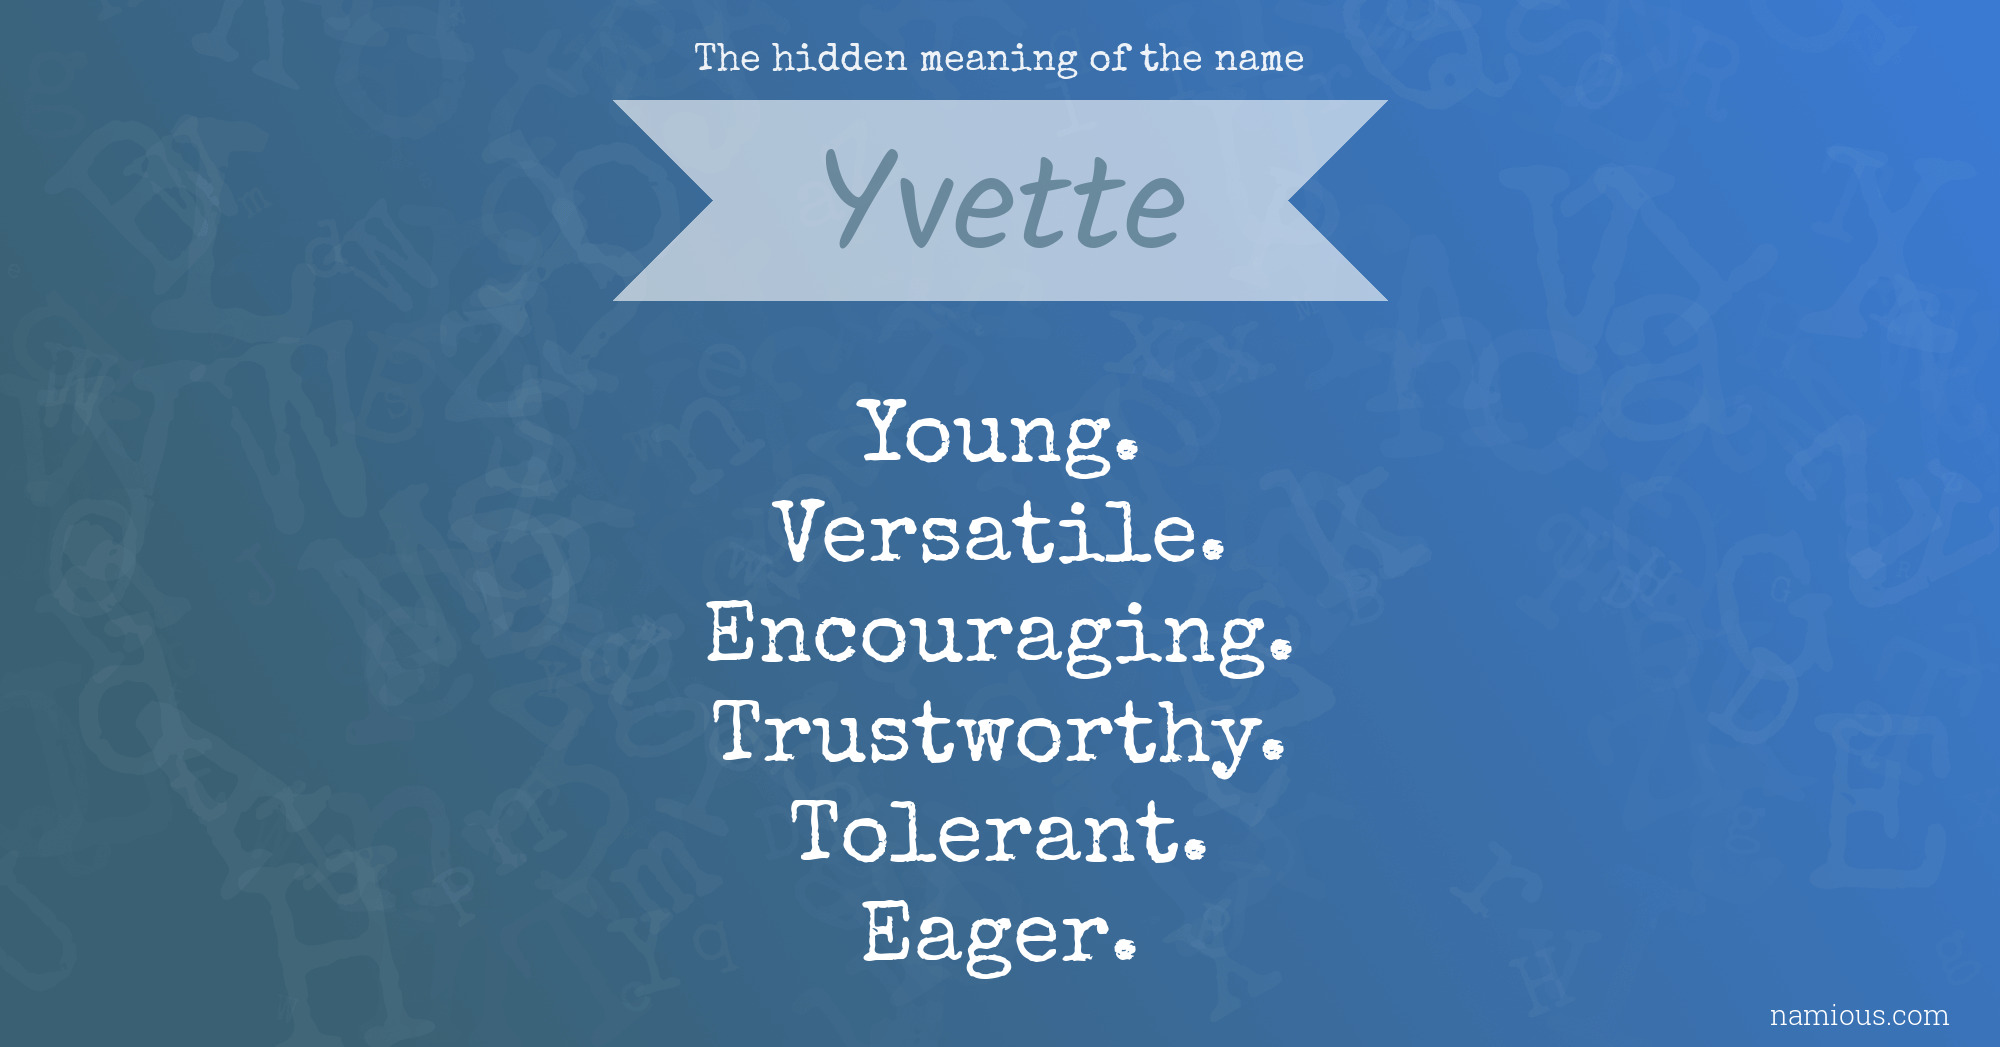 The hidden meaning of the name Yvette